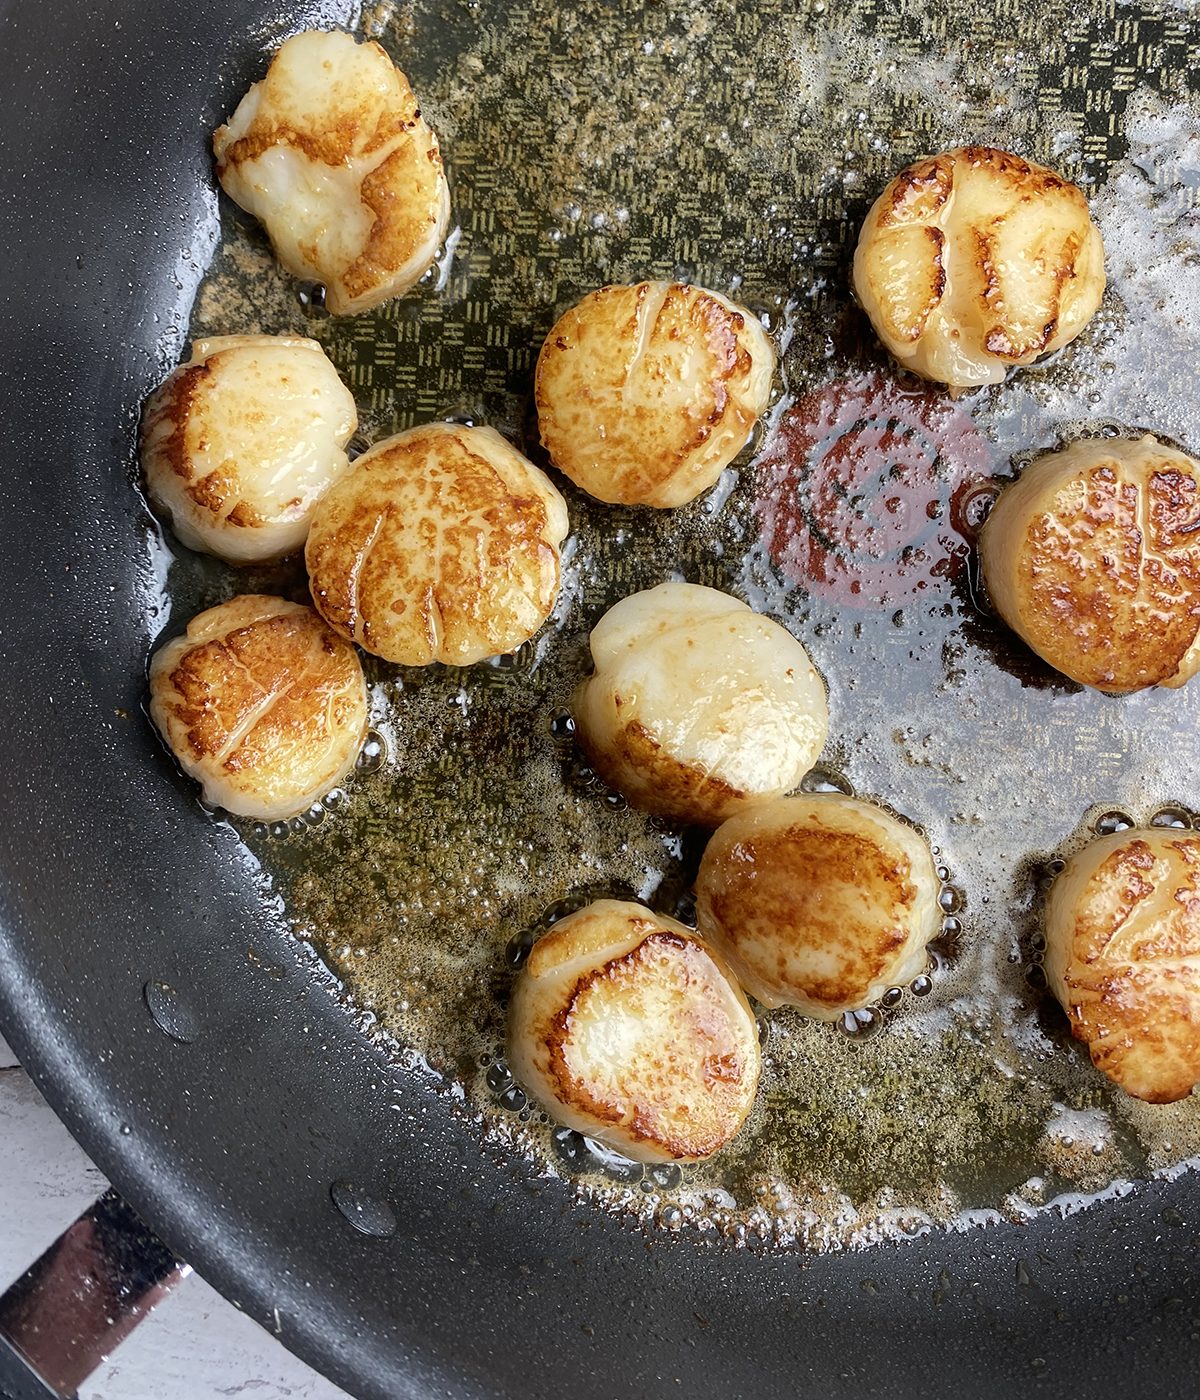 Scallops searing in a skillet.